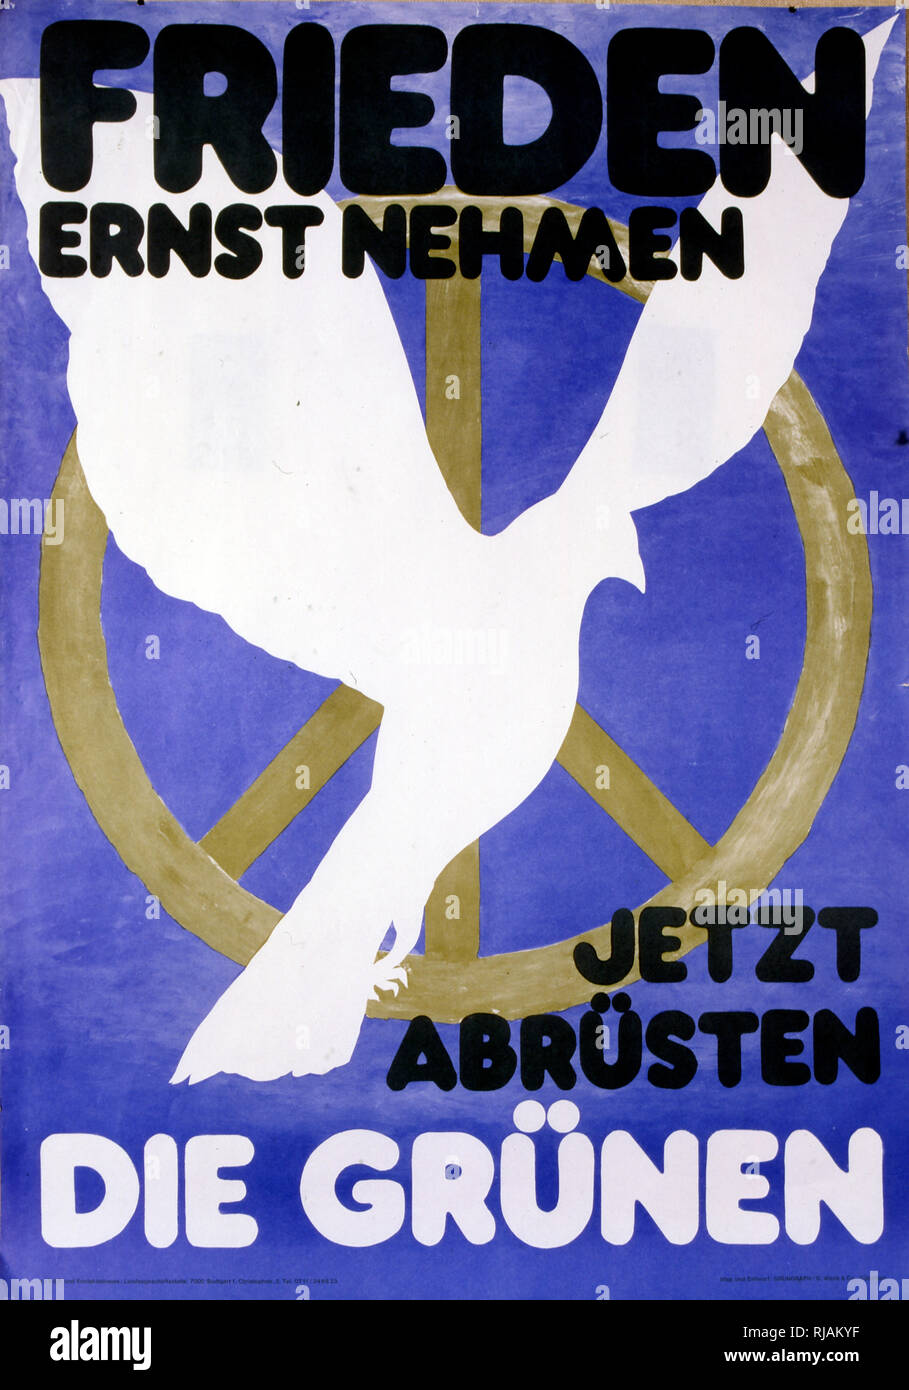 Frieden Ernst nehmen, jetzt abrusten 'Take peace seriously, now disarm' Poster issued by the German Green Party calling for nuclear disarmament  1981 Stock Photo